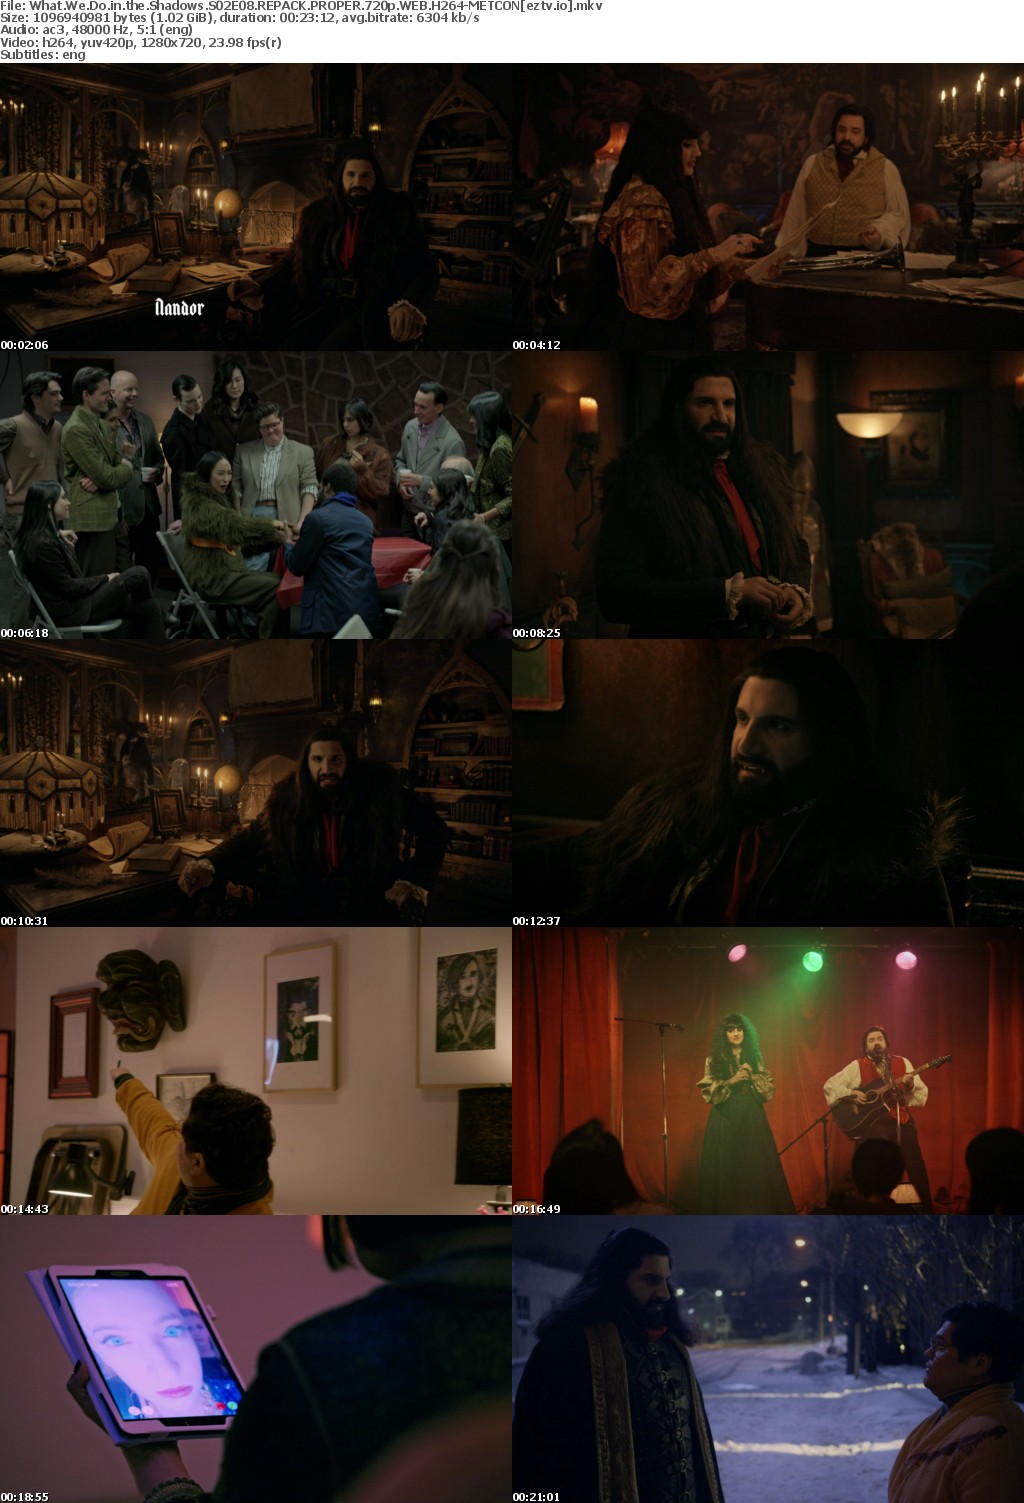 What We Do in the Shadows S02E08 REPACK PROPER 720p WEB H264-METCON